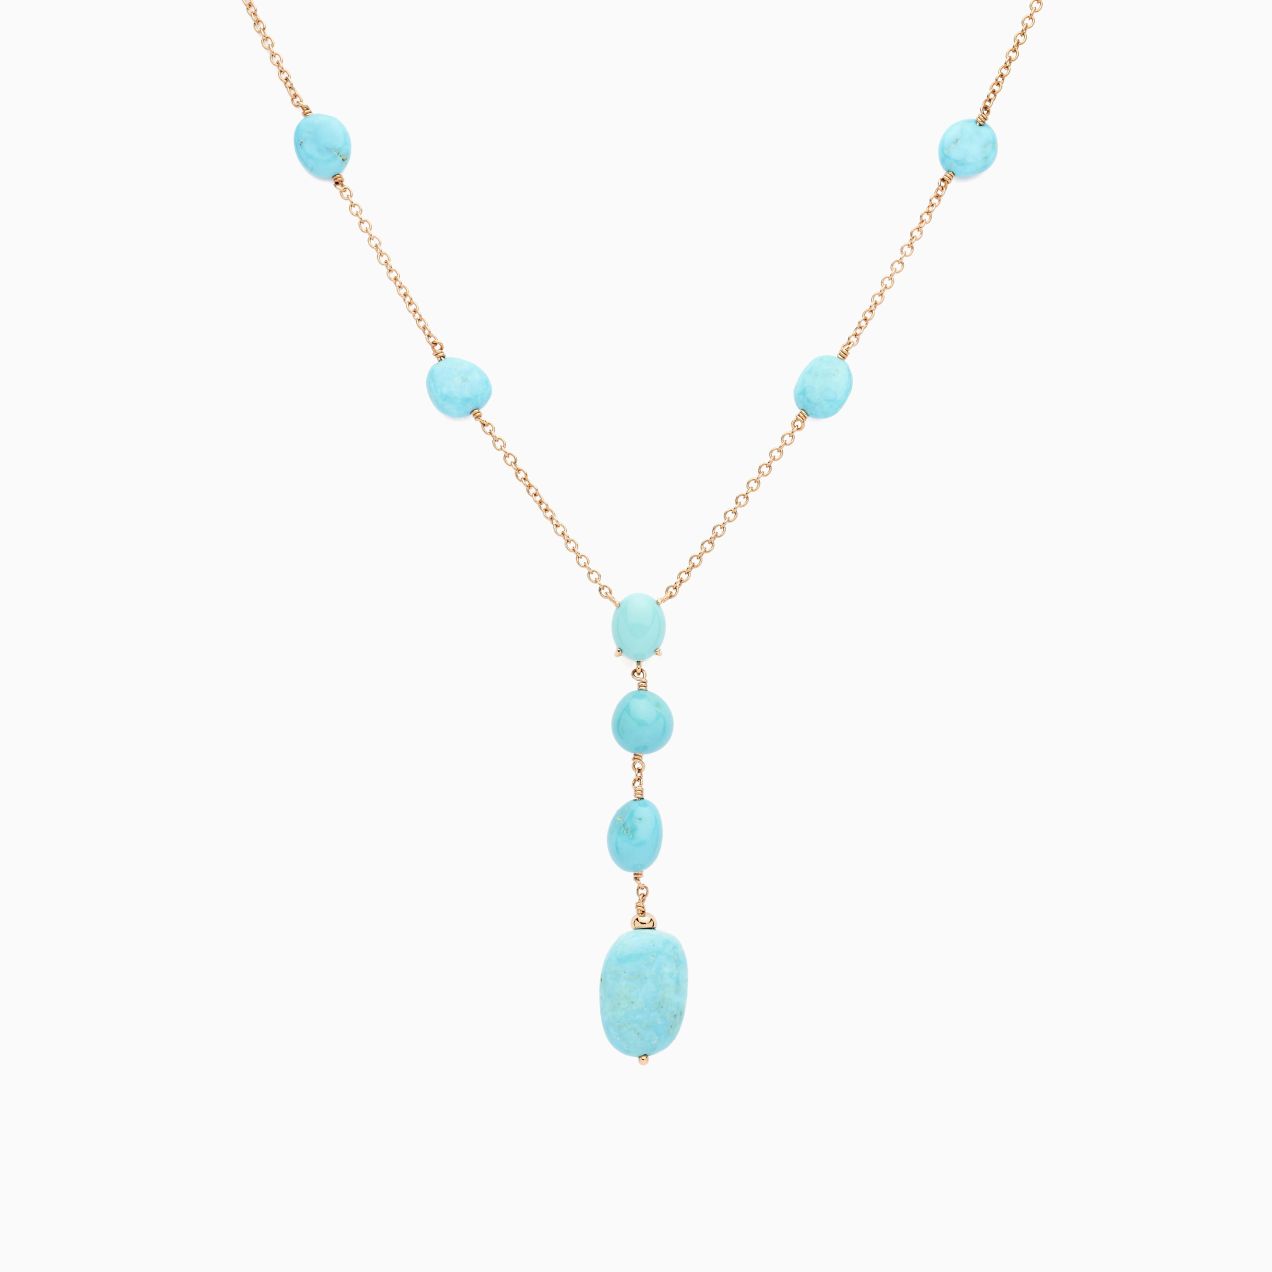 Rose gold necklace with turquoise gems